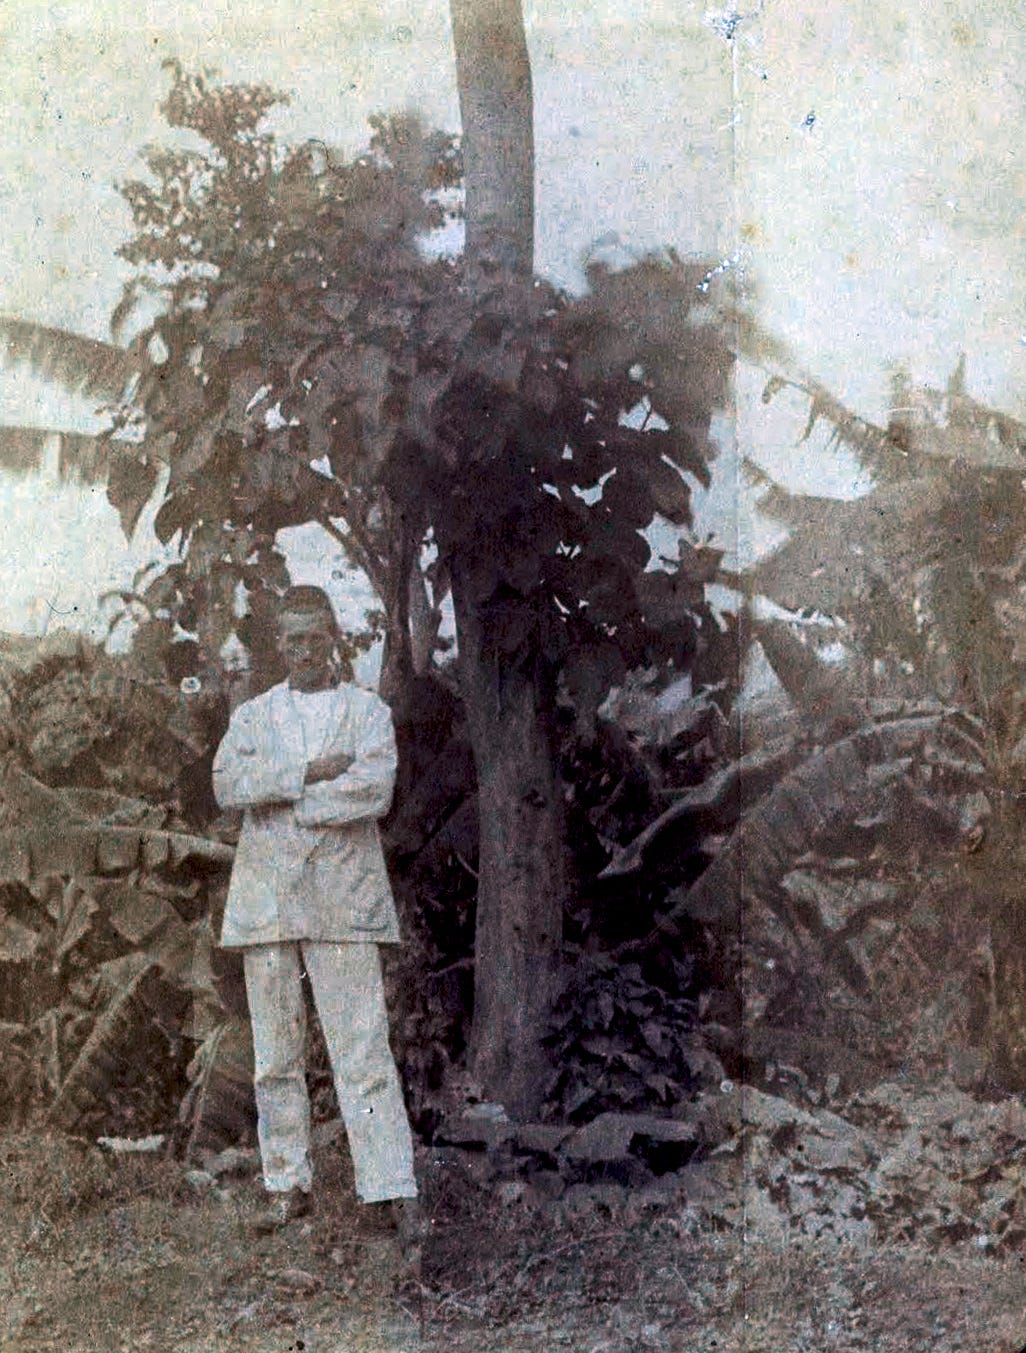 A black and white photograph of a man in white stood in front of a small tree and some various foliage. He is wearing a small fez and has his arms crossed in front of his chest, his legs astride confidently. His face is indistinct.